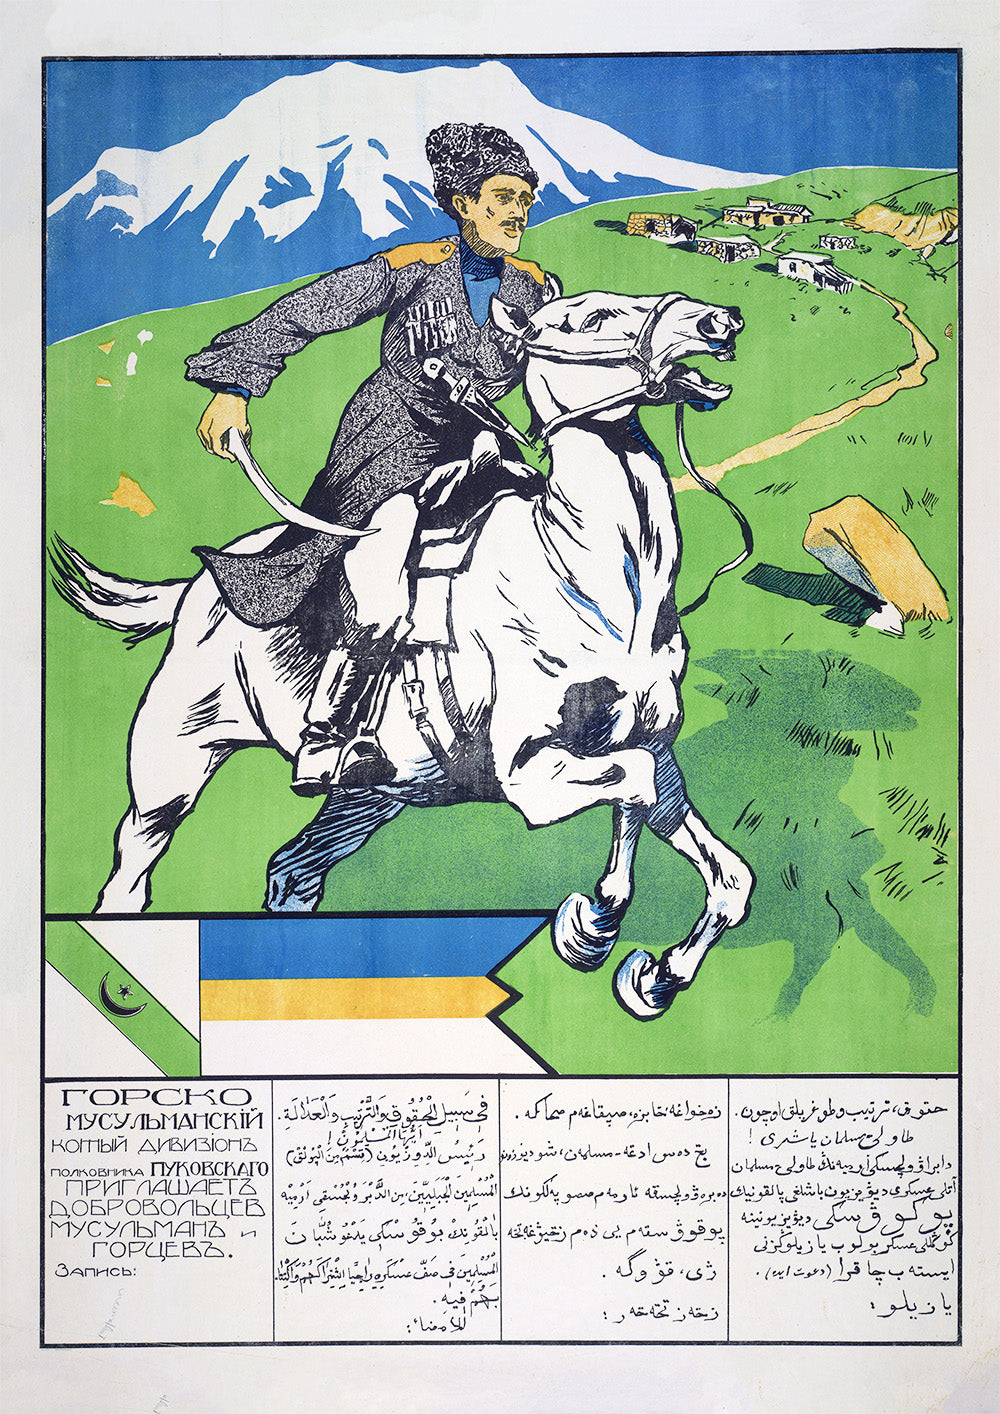 Mountain dwellers and Muslims - enlist! – Russian poster